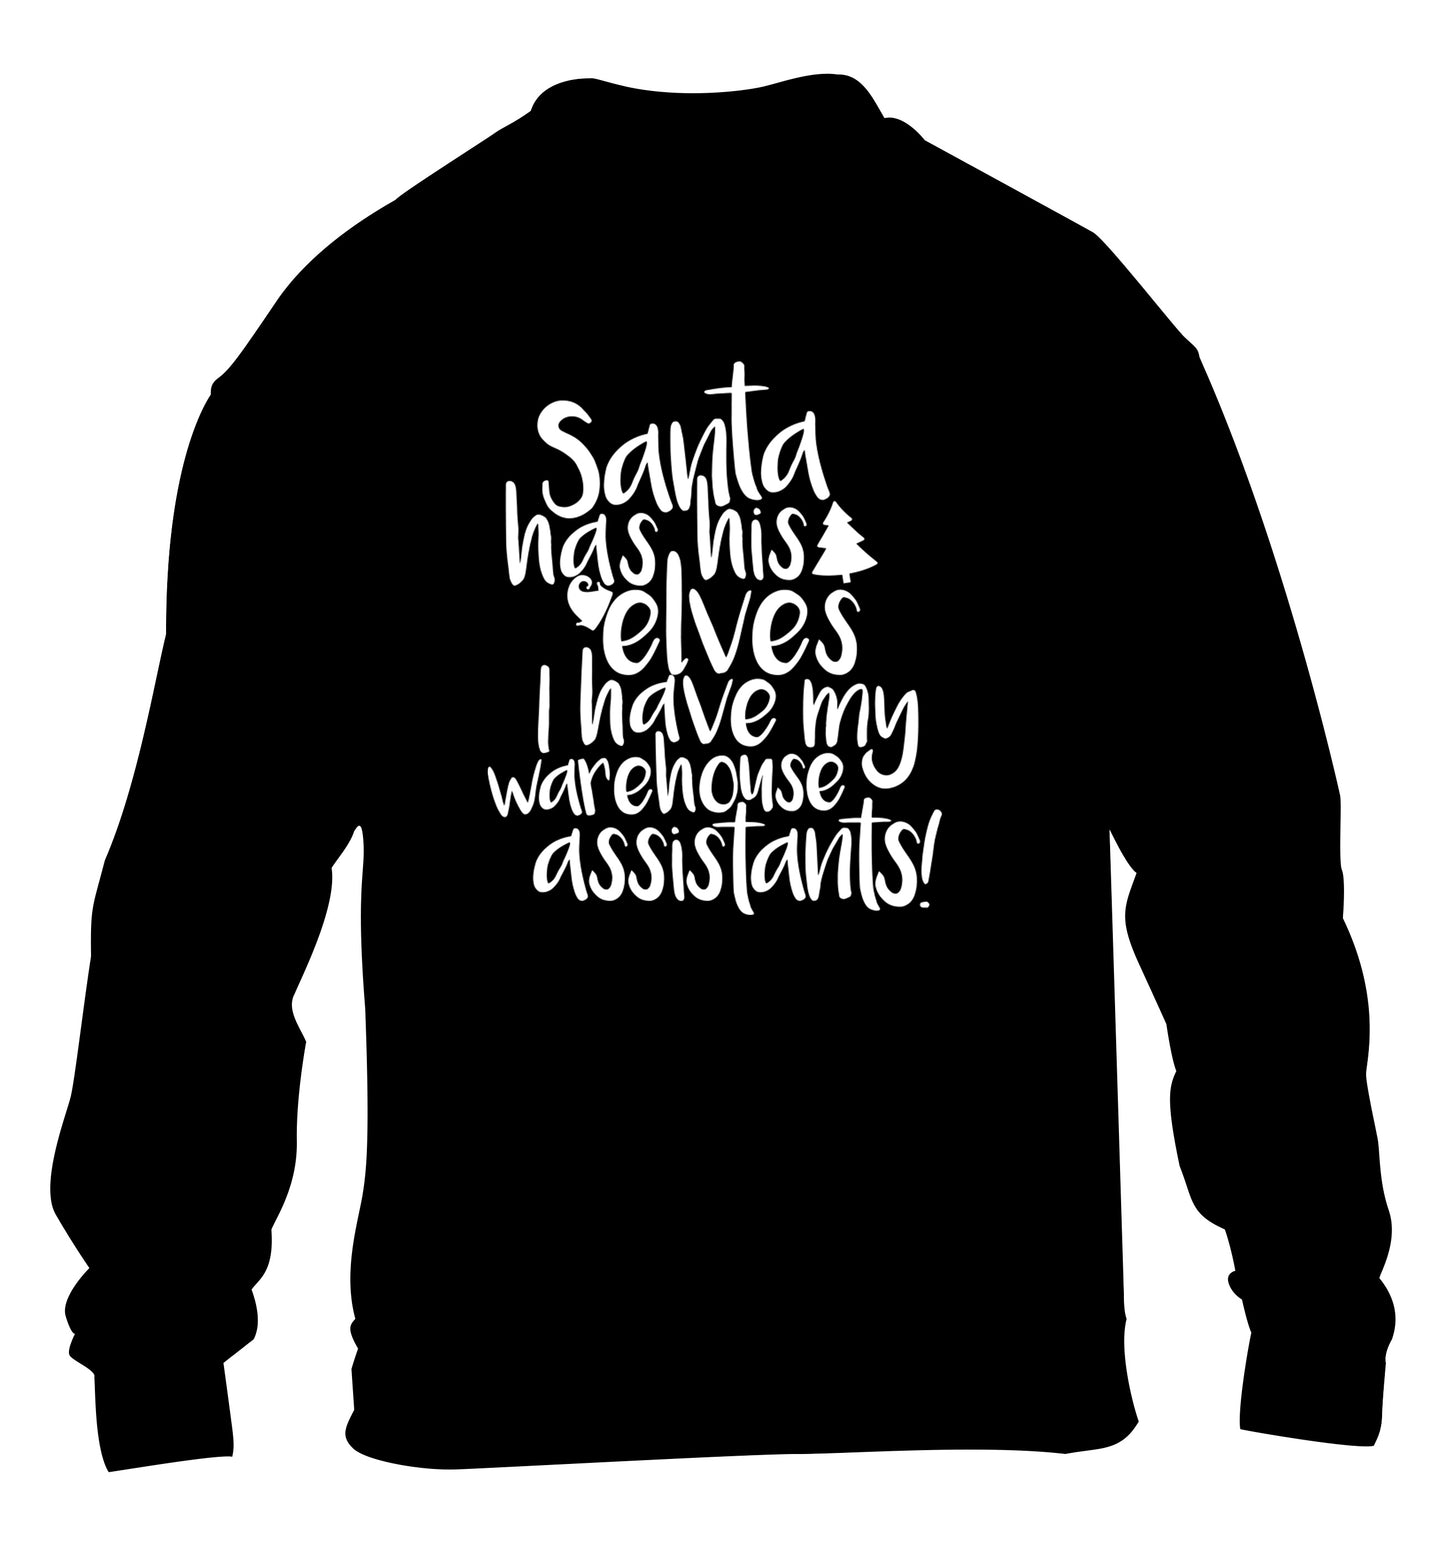 Santa has his elves I have my warehouse assistants children's black sweater 12-14 Years